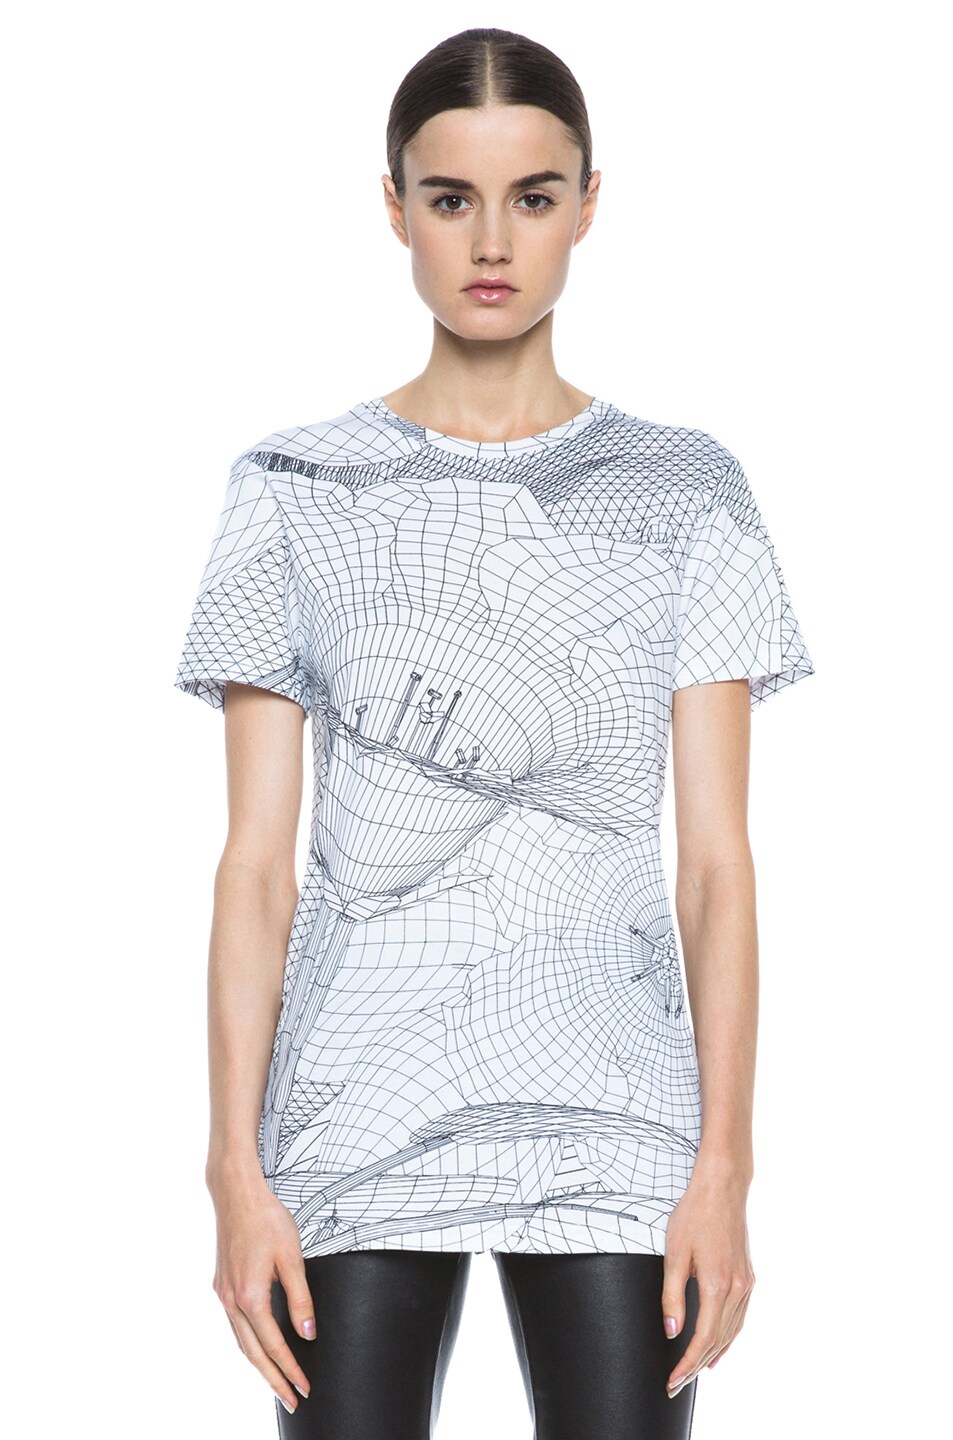 Christopher Kane Screen Print Grid Floral Cotton T-Shirt in White | FWRD